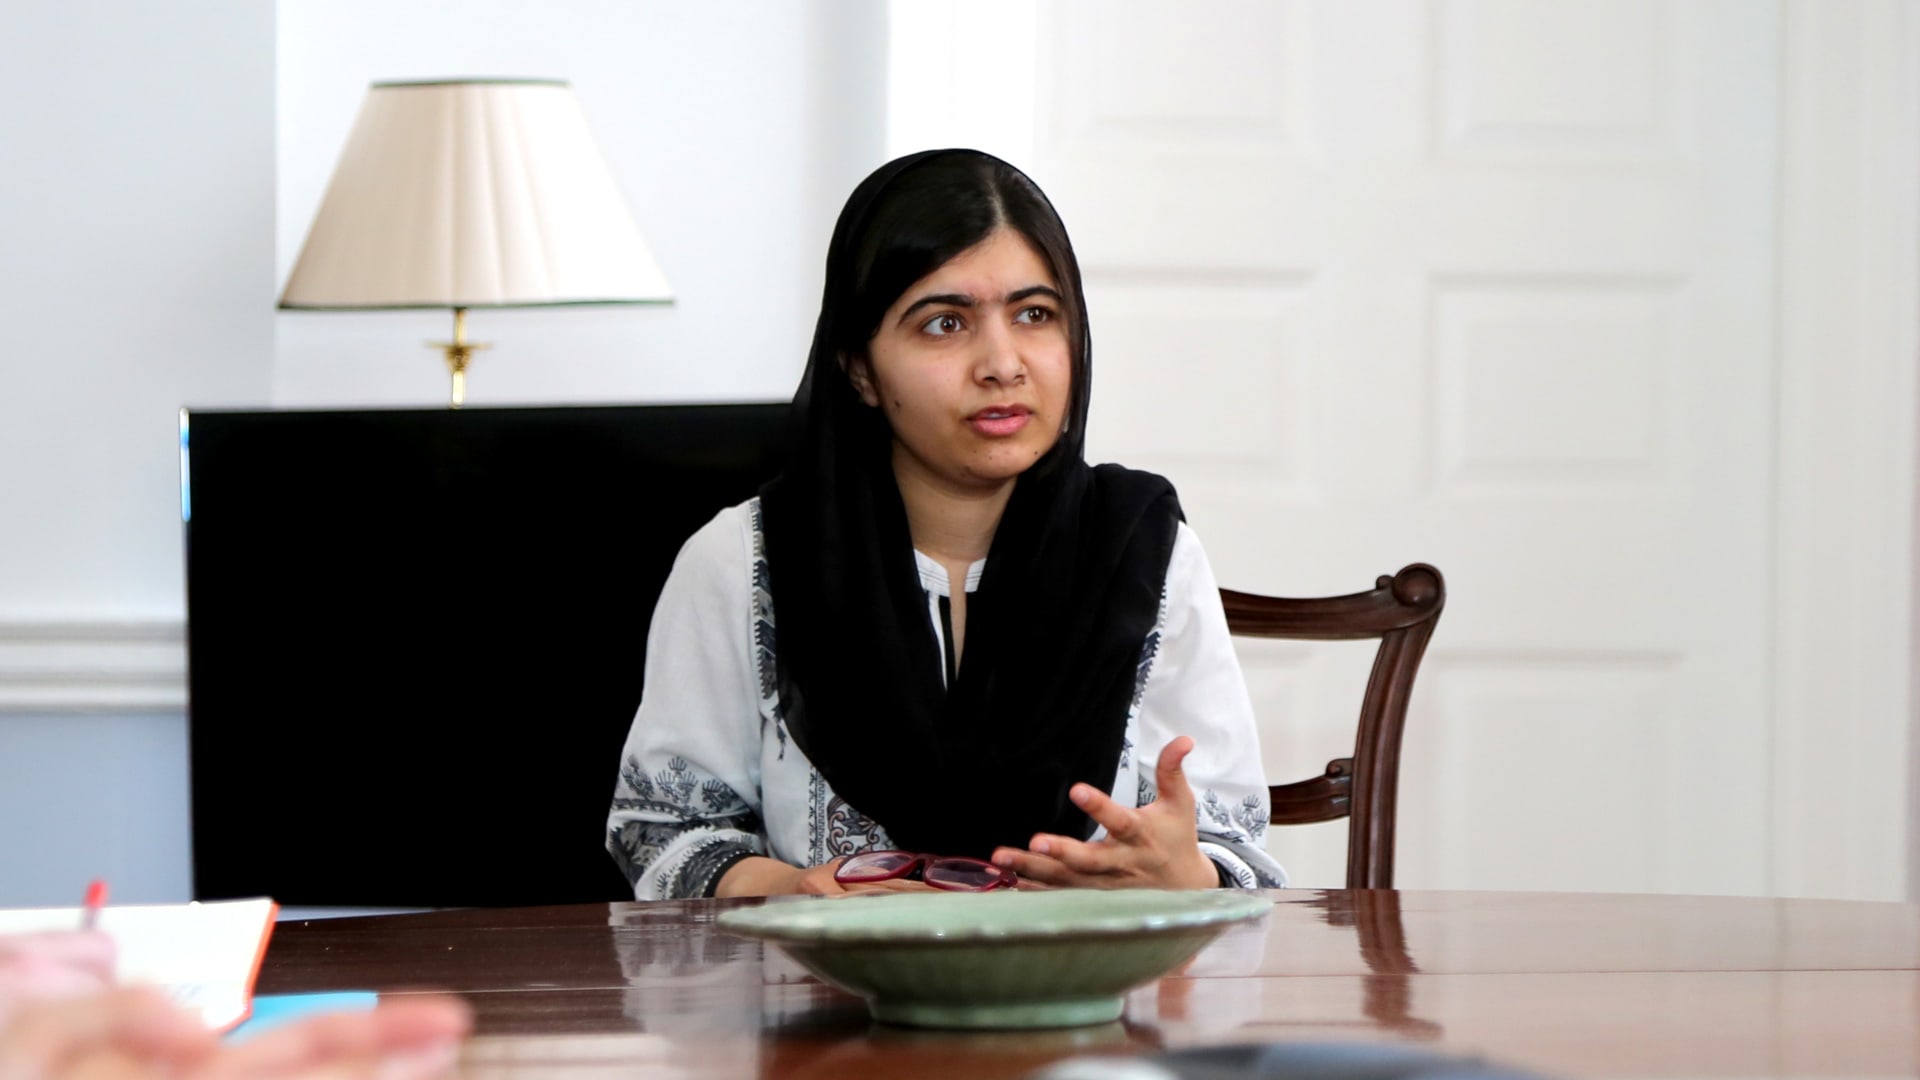 Apple teams up with the Malala Fund to support girls’ education